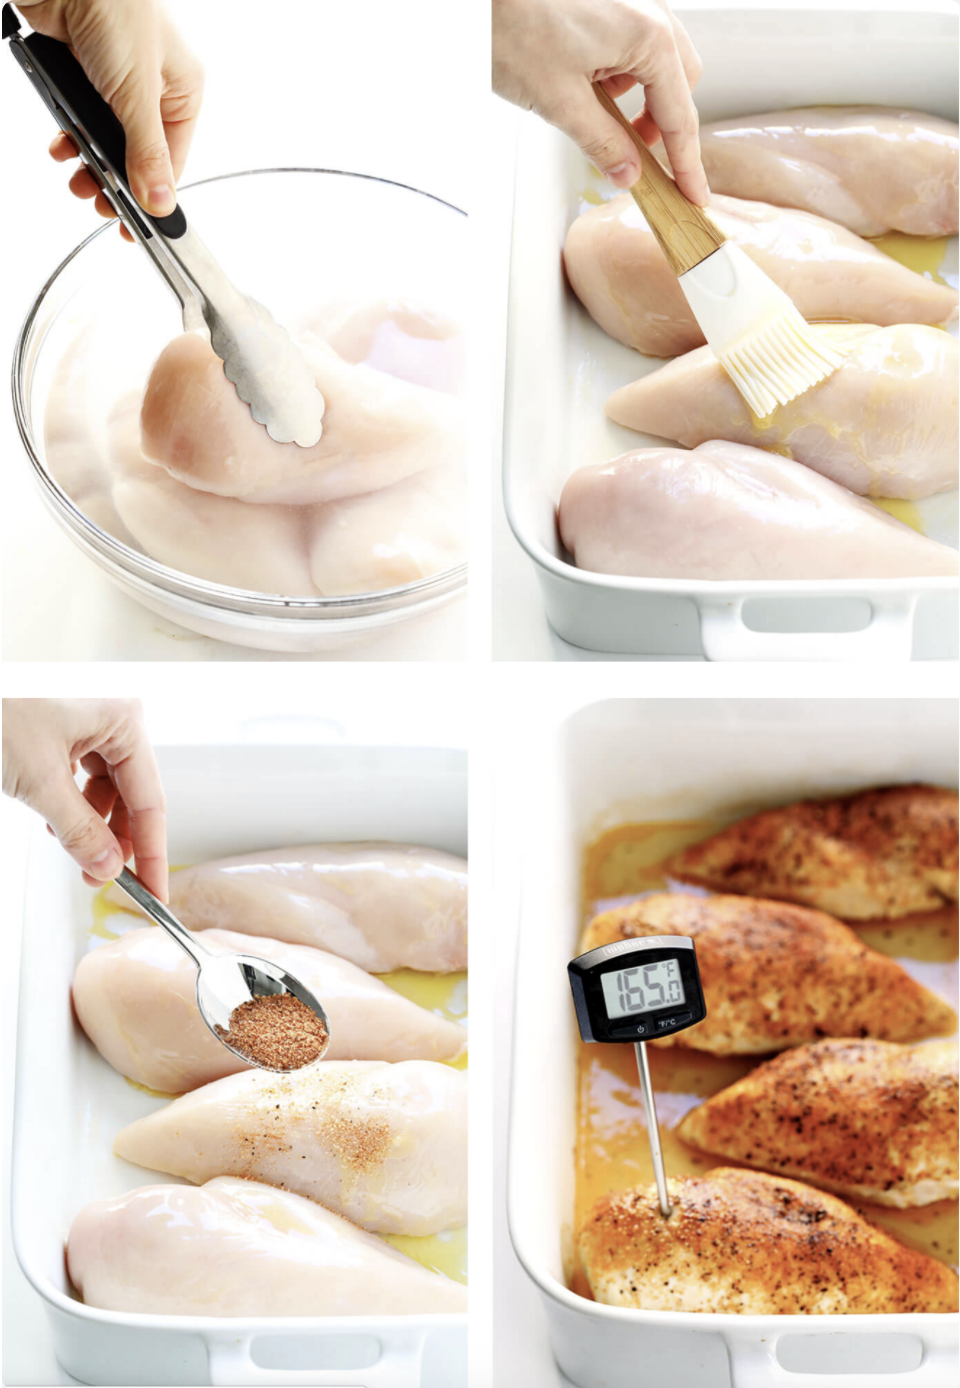 Chicken breasts being dipped into water, brushed with butter, seasoned, then baked